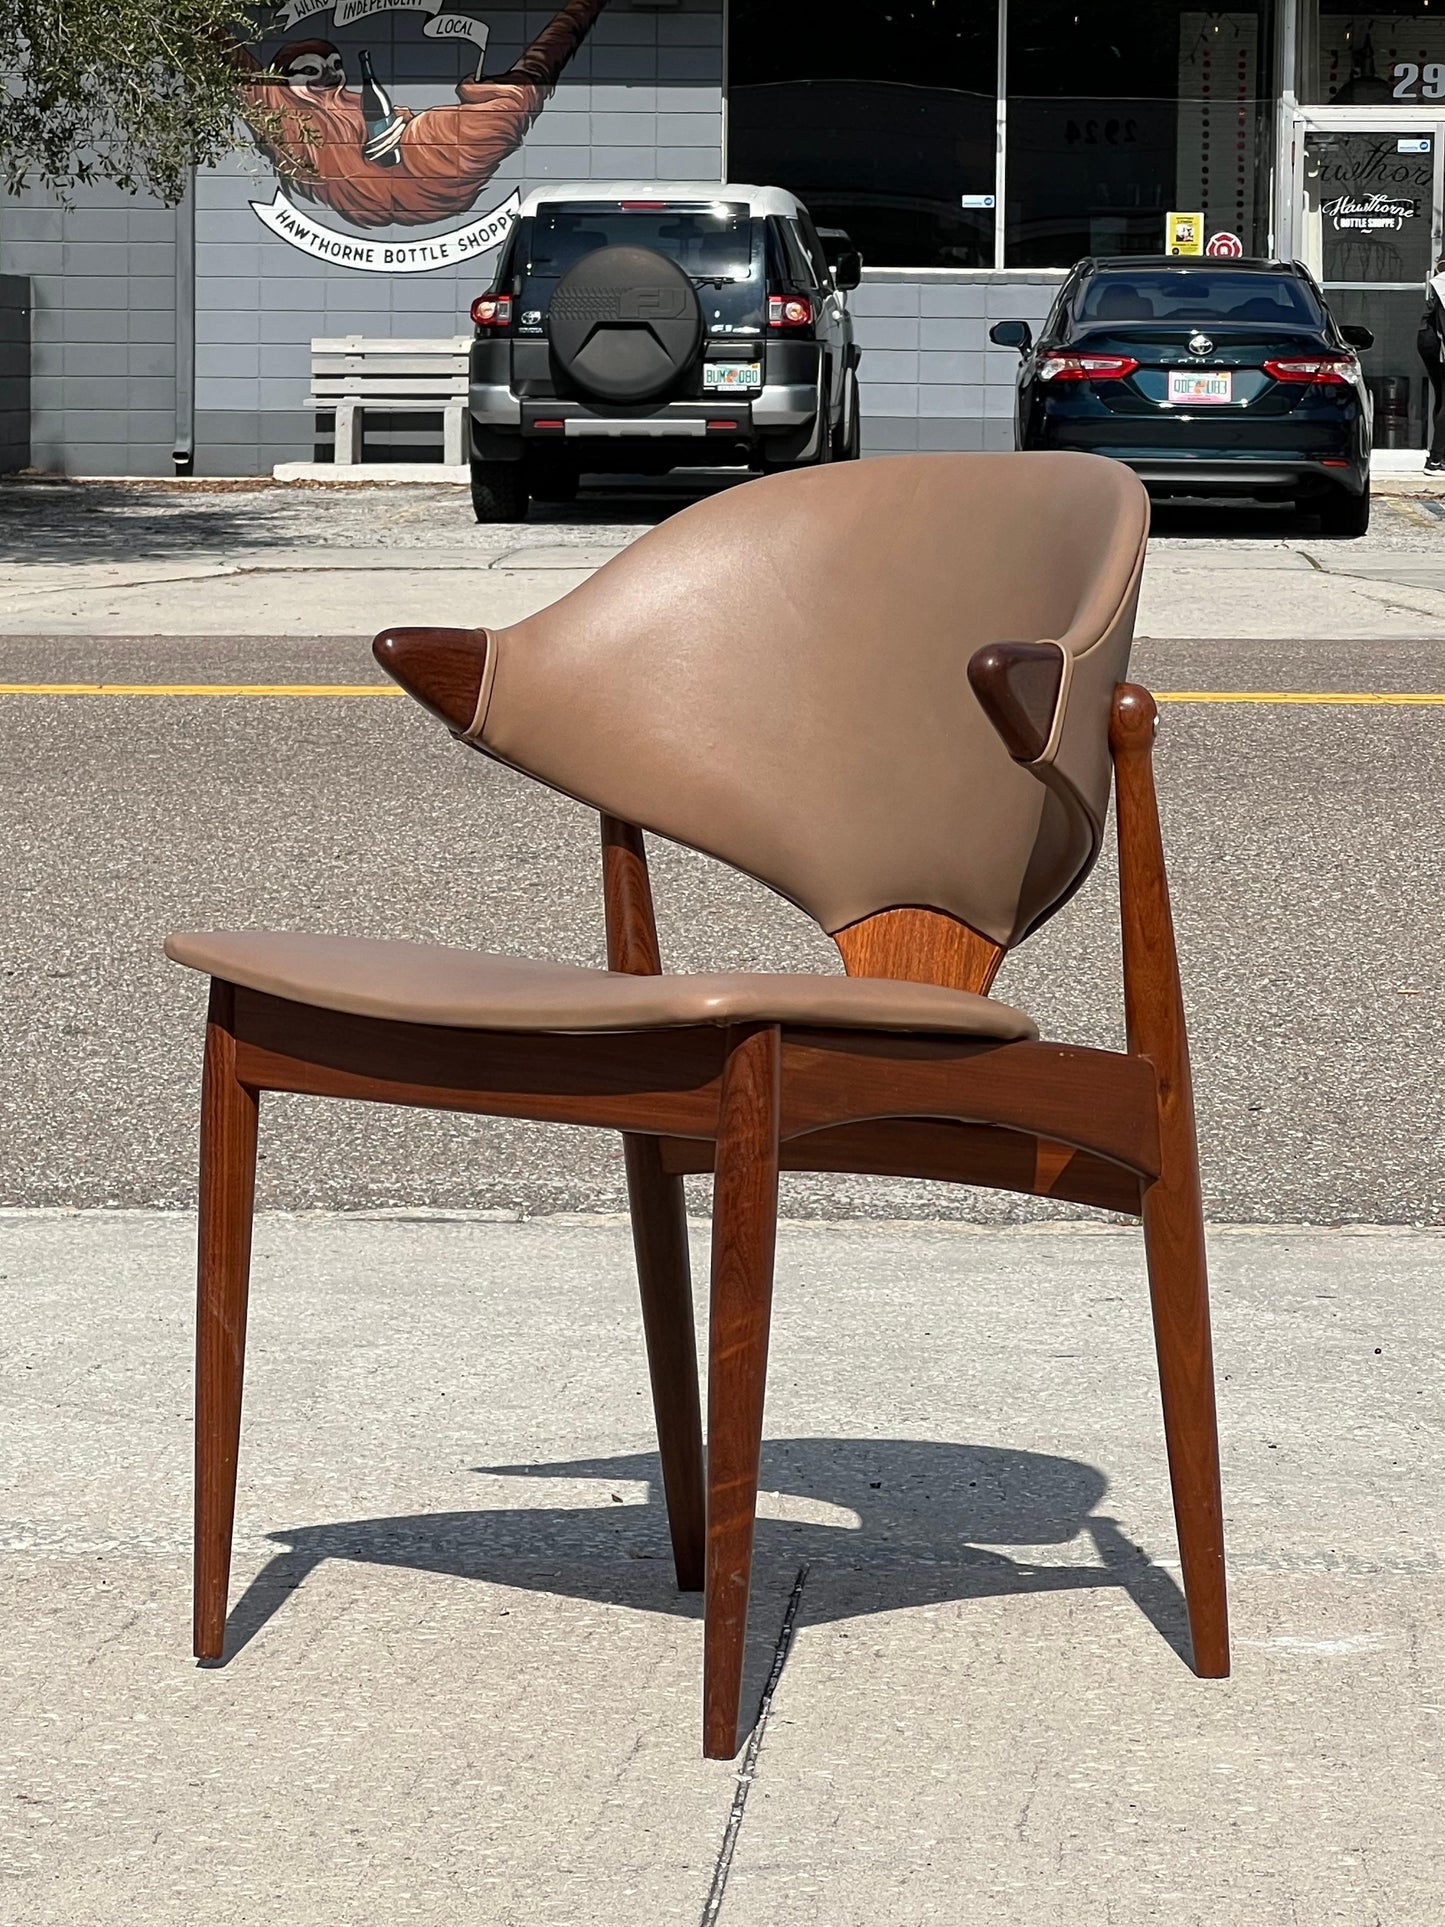 Classic Arne Vodder Leather And Teak Chair For Mahjongg Holland 1964